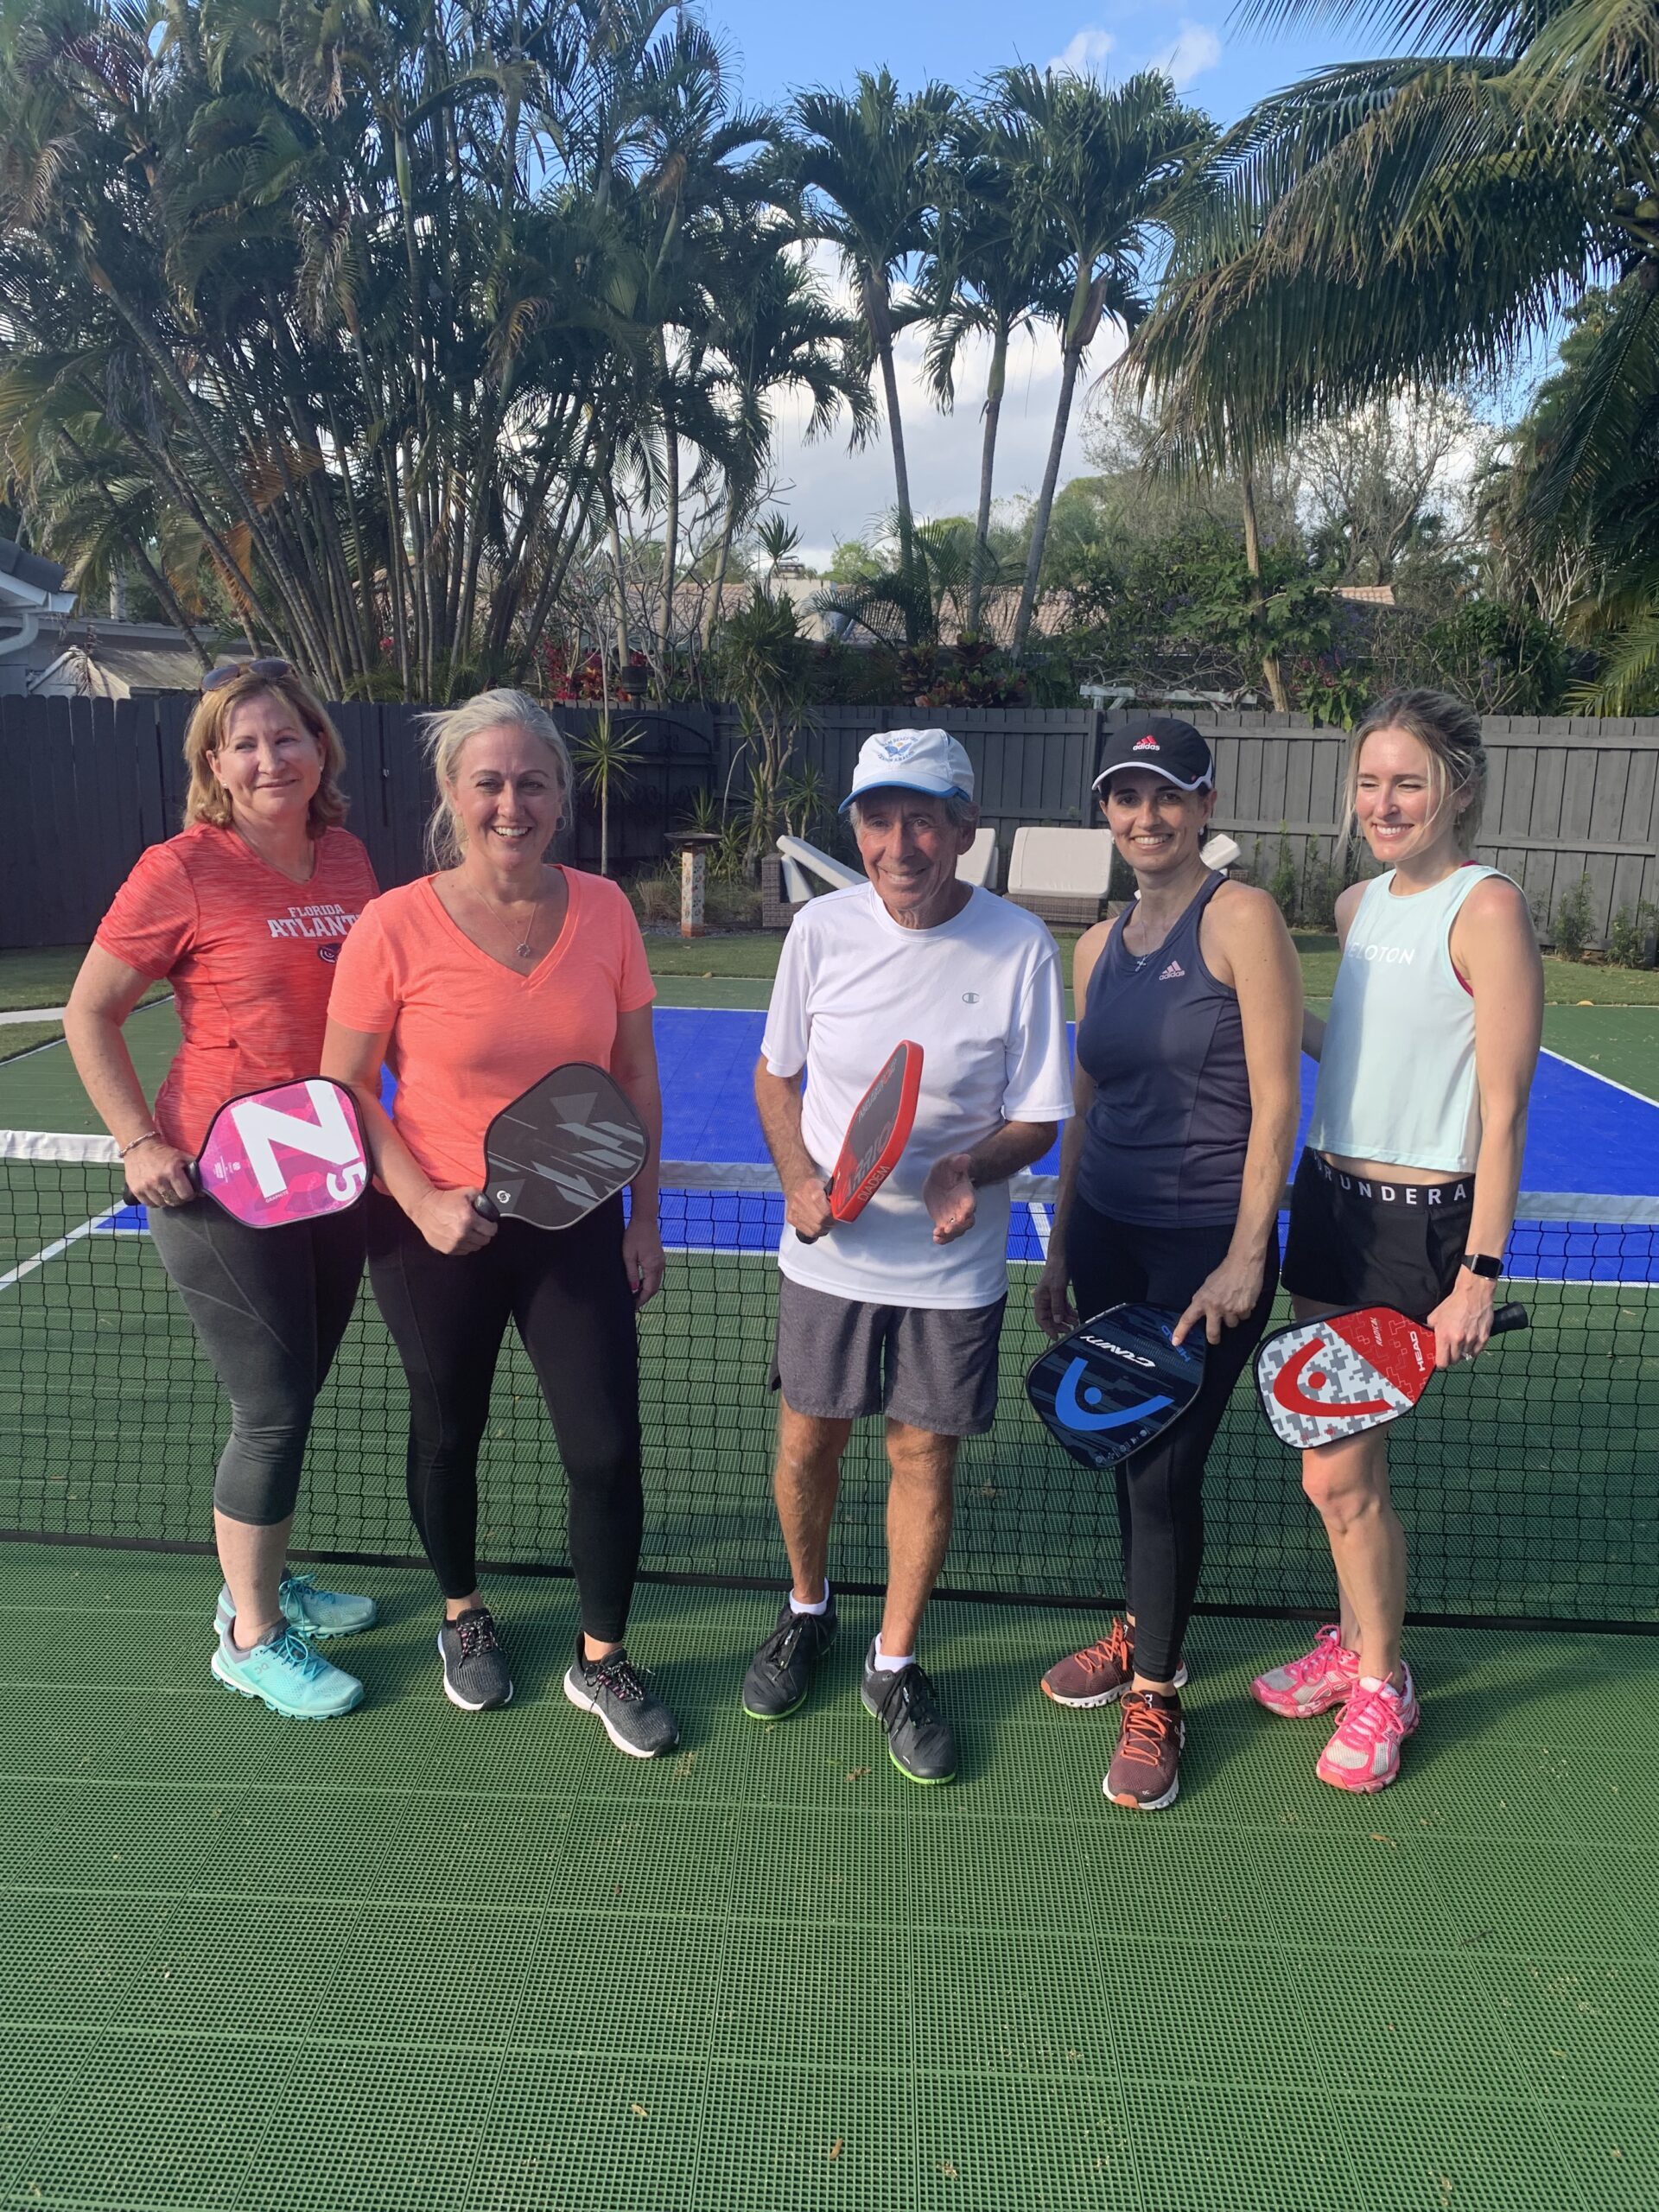 Bob with Susan, Nicole, Sarah, and Margarita after a pickleball lesson in Boca Raton, FL